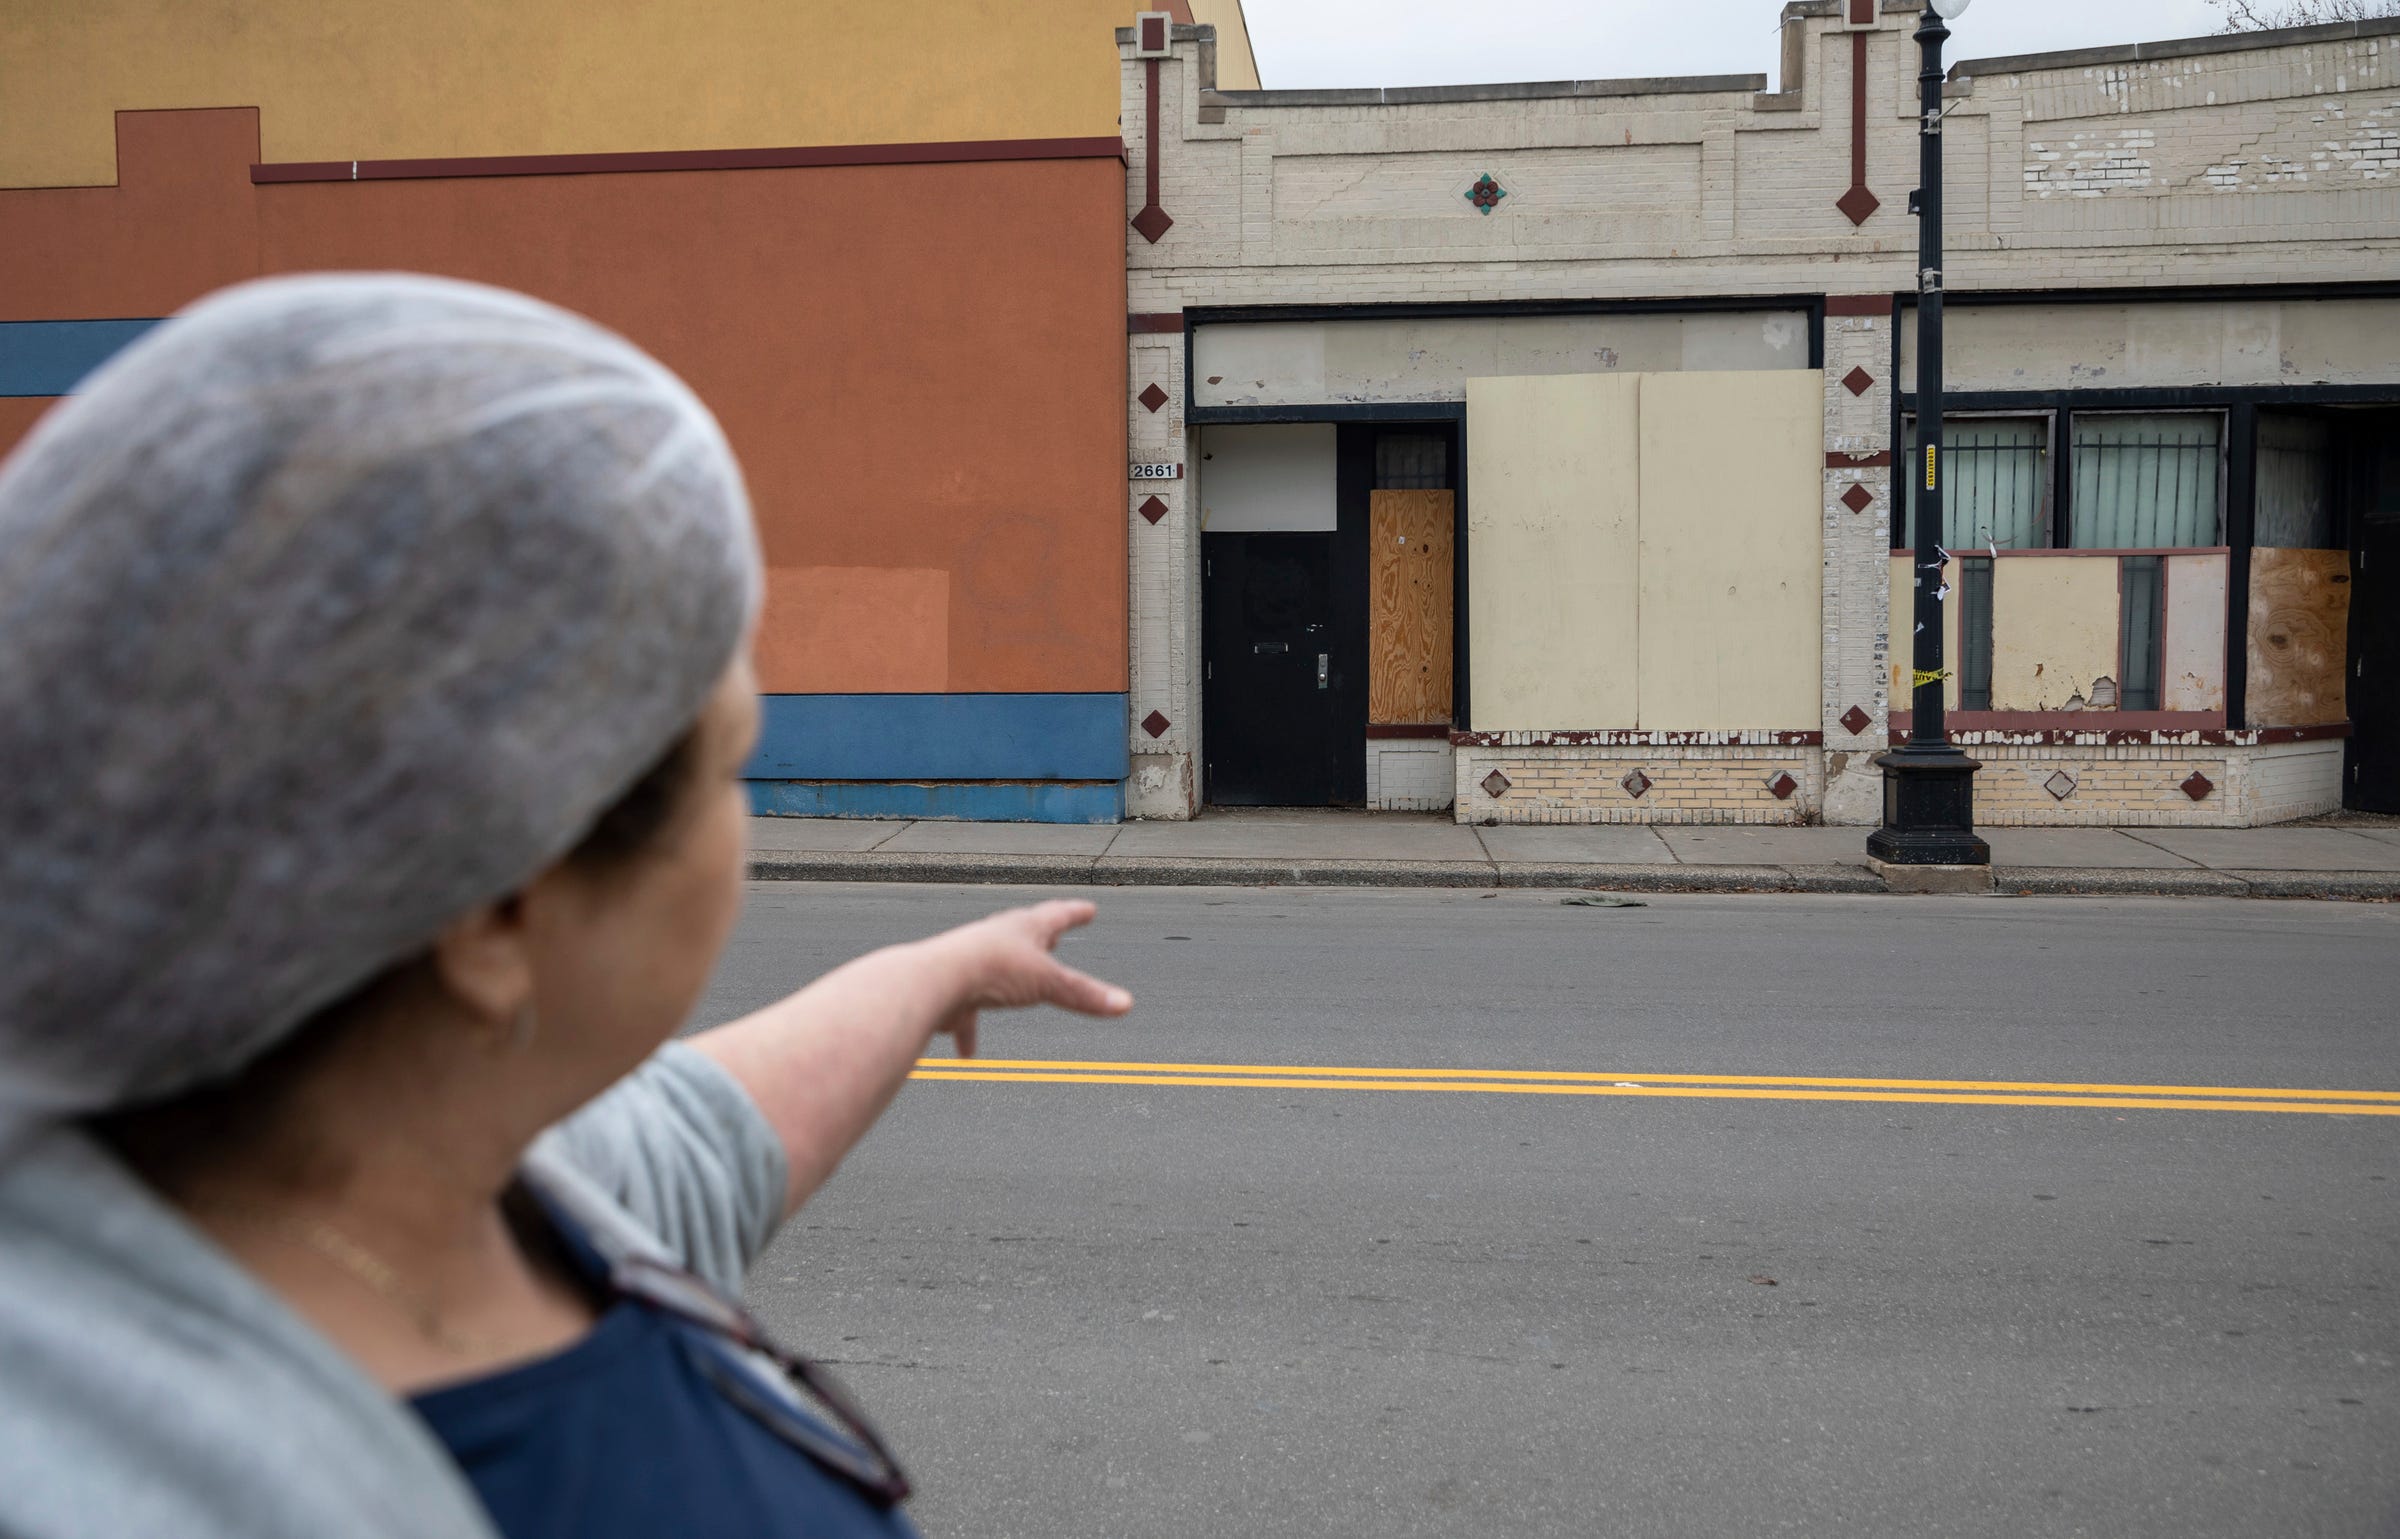 Tamaleria Nuevo Leon owner Susana "Suzy" Villarreal-Garza points at the old building on Bagley Street where Tamaleria Nuevo Leon was before they moved to its current location at 2669 Vernon Hwy., as she walks during early morning on Thursday, March 2, 2023.